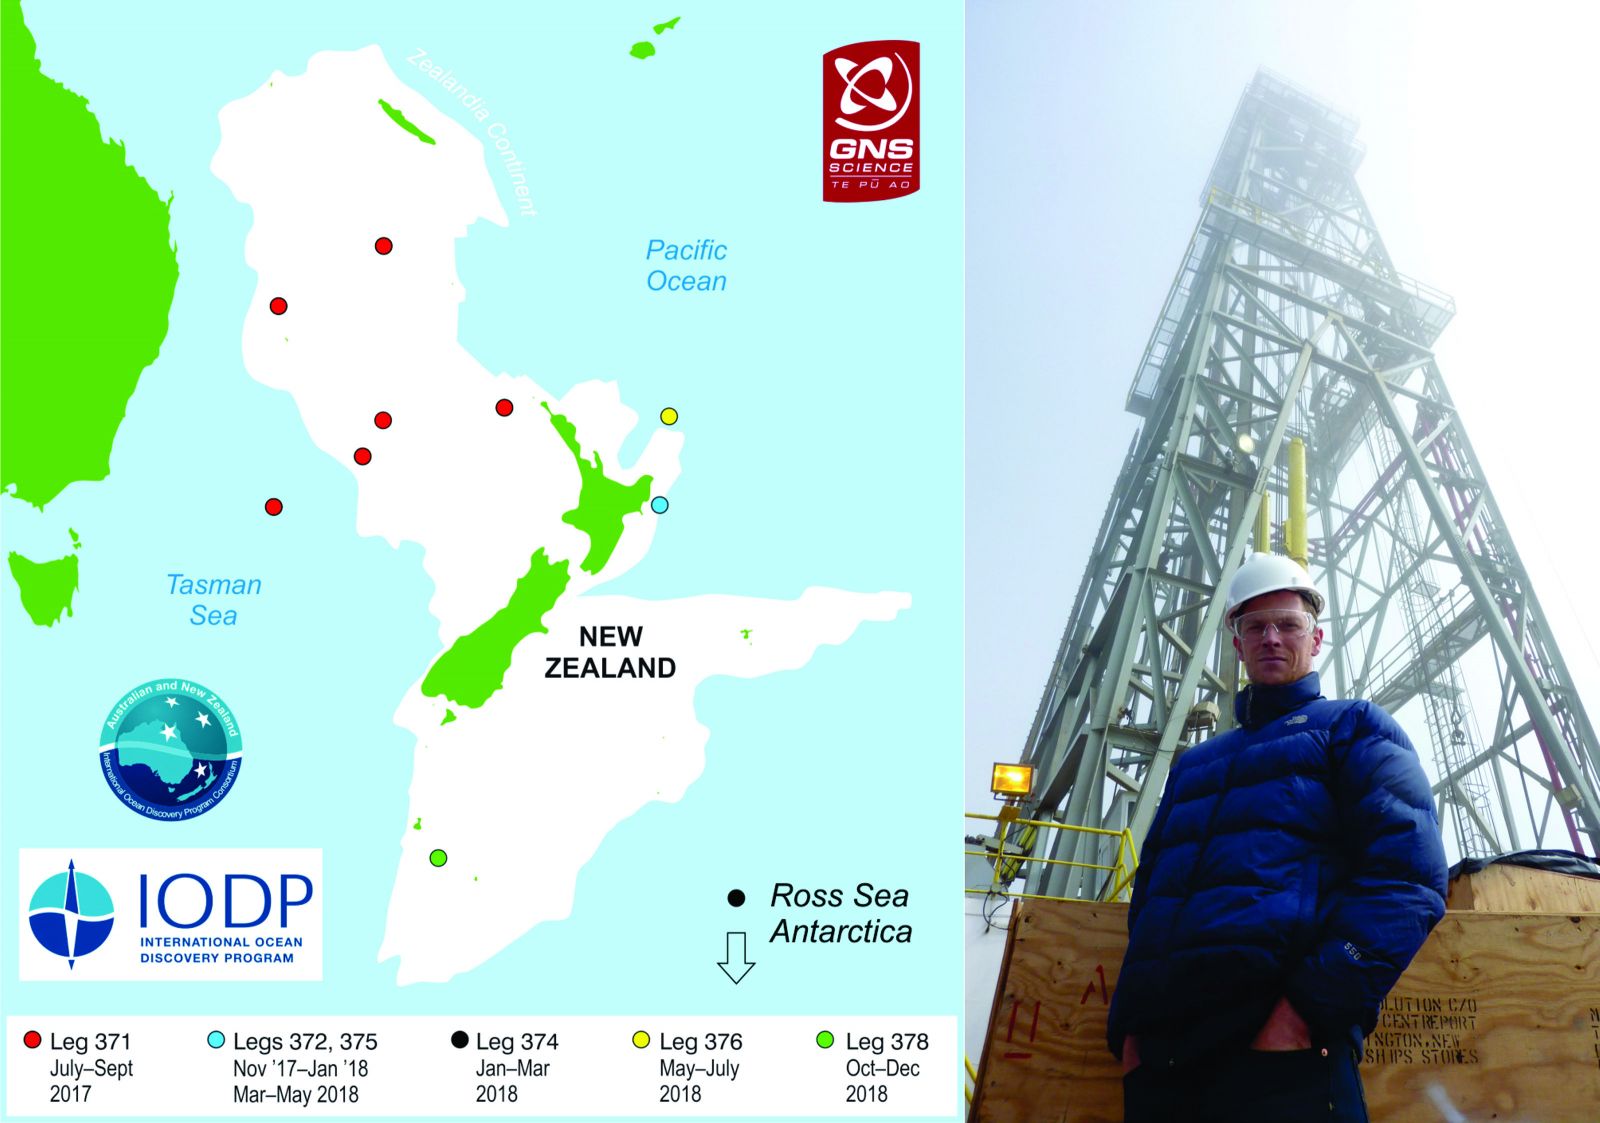 Left: Map of IODP sites. Right: Rob McKay on board the JOIDES Resolution in 2010.